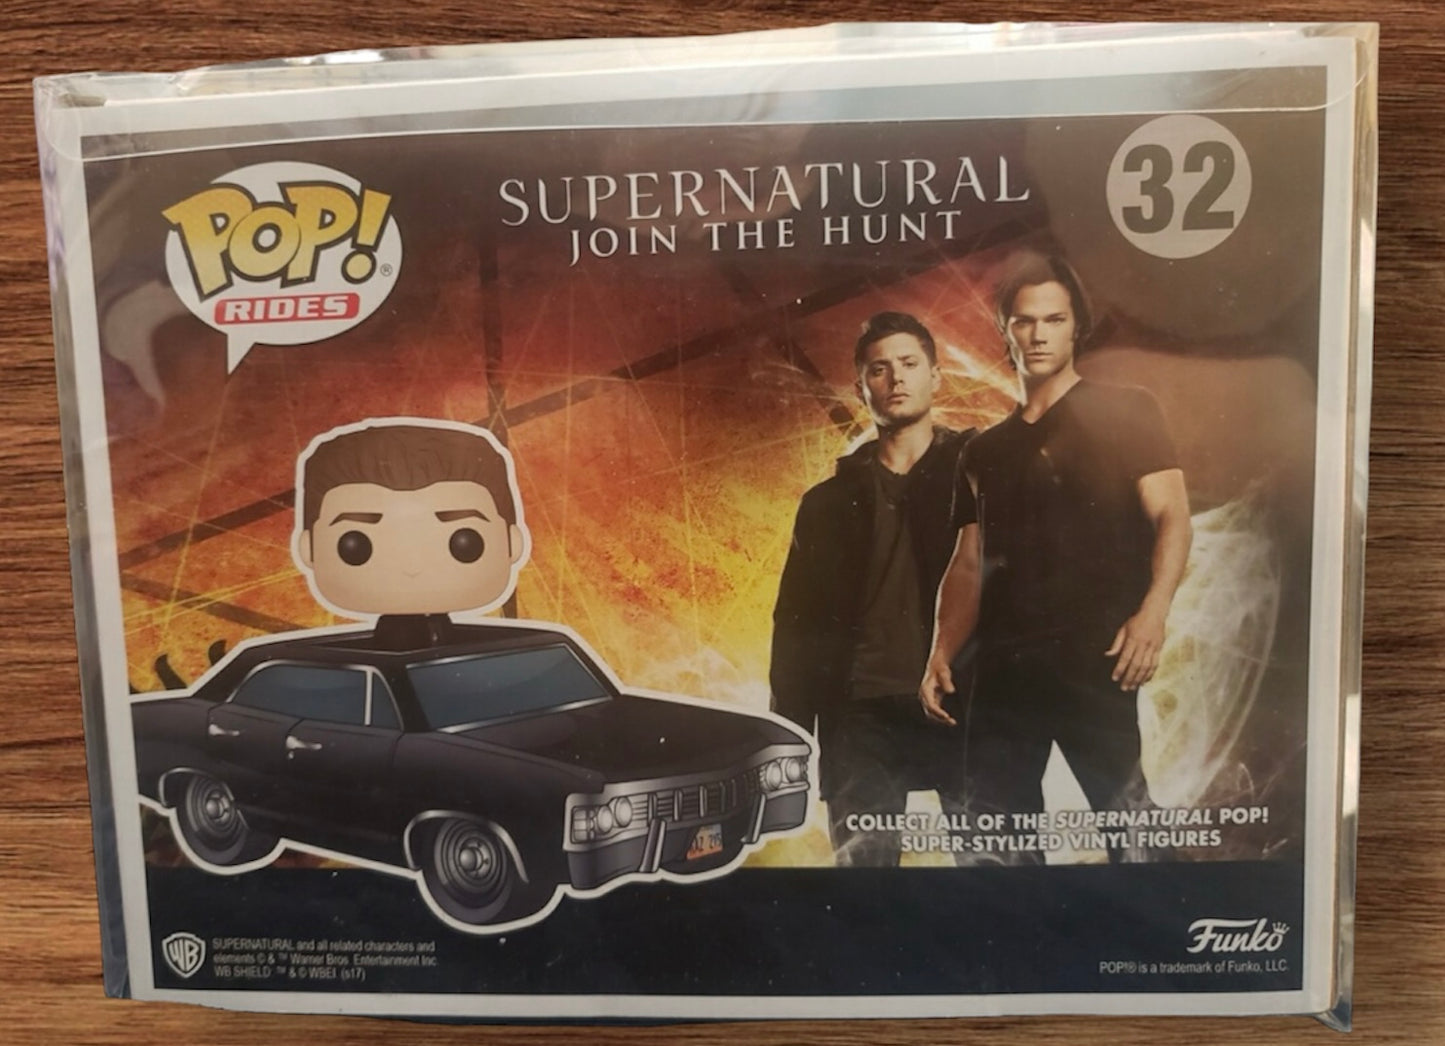 2017 Summer Convention Exclusive Supernatural Funko POP! Rides-#32 - Dean with Baby. ADORABLE, CUTE & RARE!